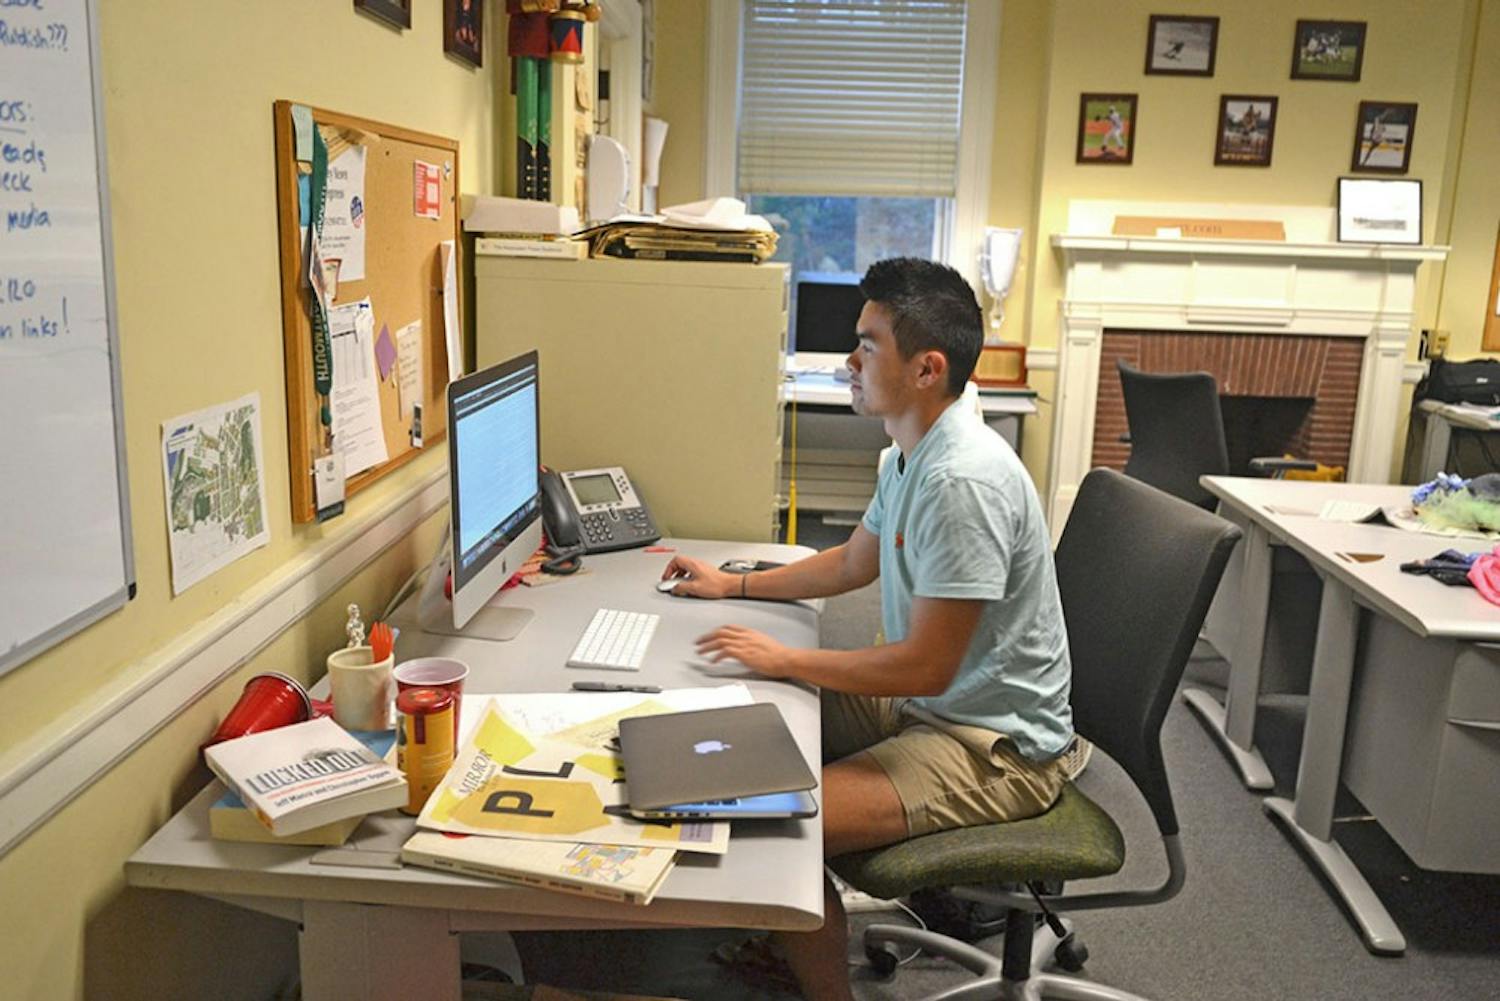 Ray Lu '18 works on a computer at The D's office.